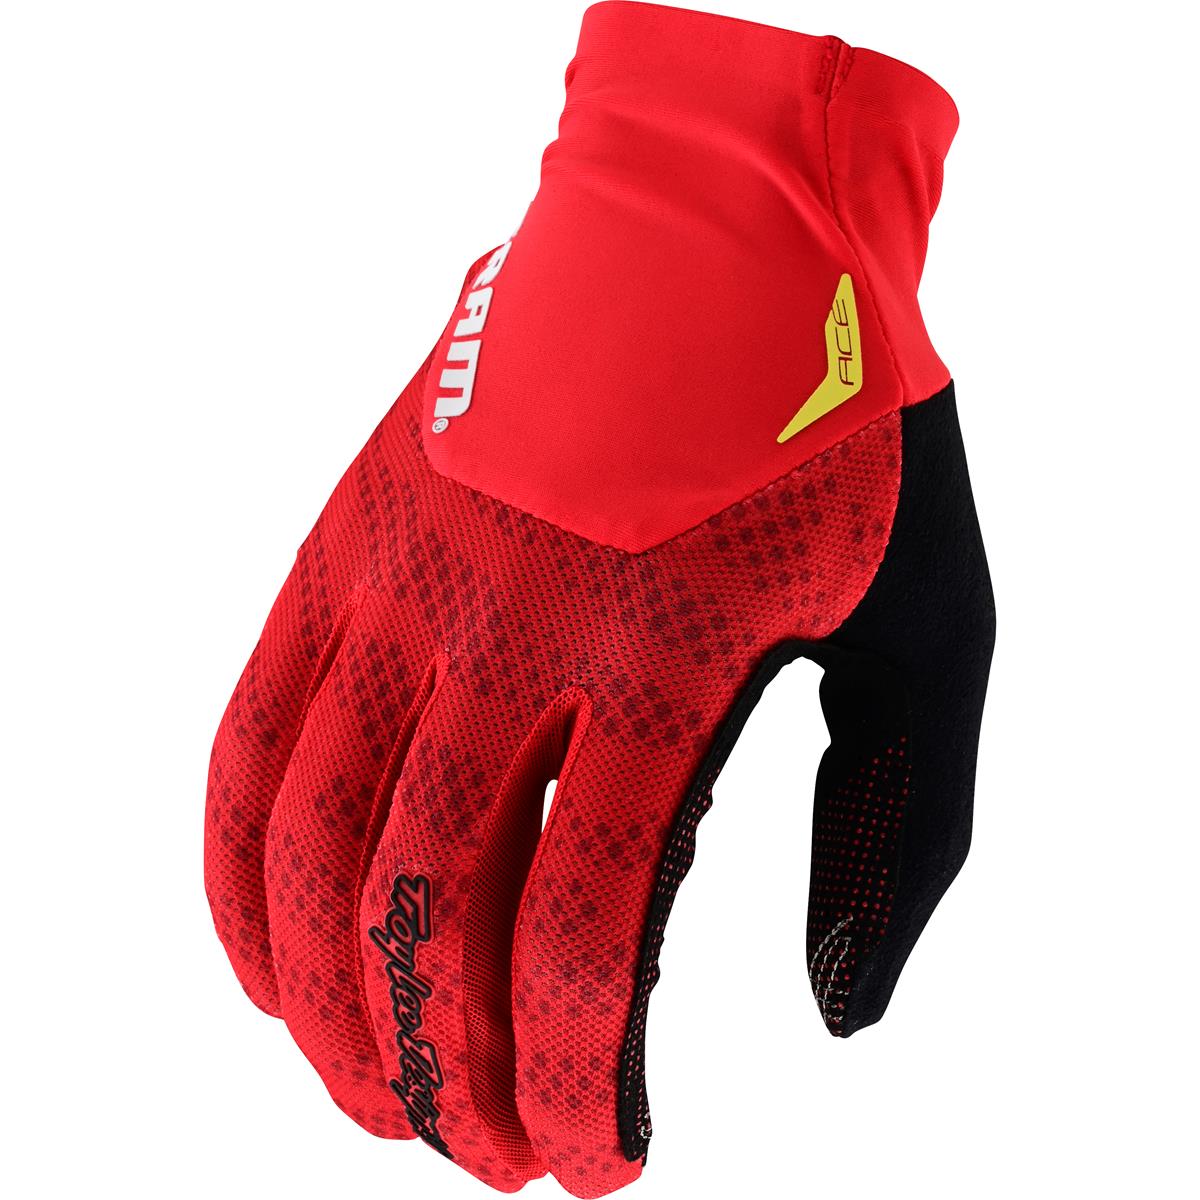 Troy Lee Designs MTB Gloves Ace Sram - Shifted Fiery Red